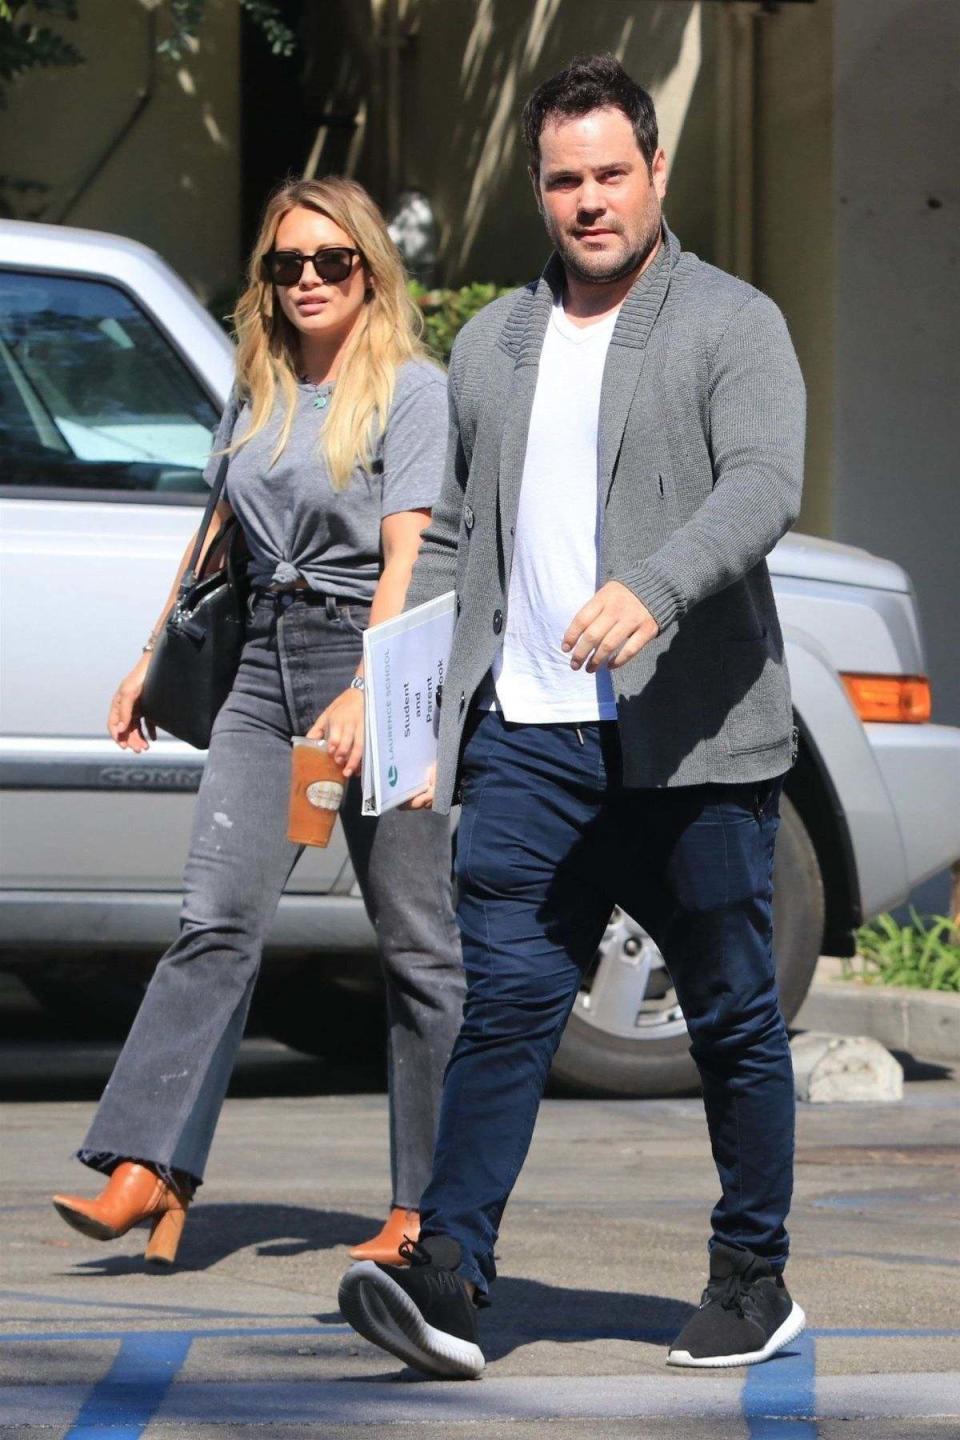 Hilary Duff and Mike Comrie had lunch together without their son on Aug. 30. (Photo: AKM-GSI)